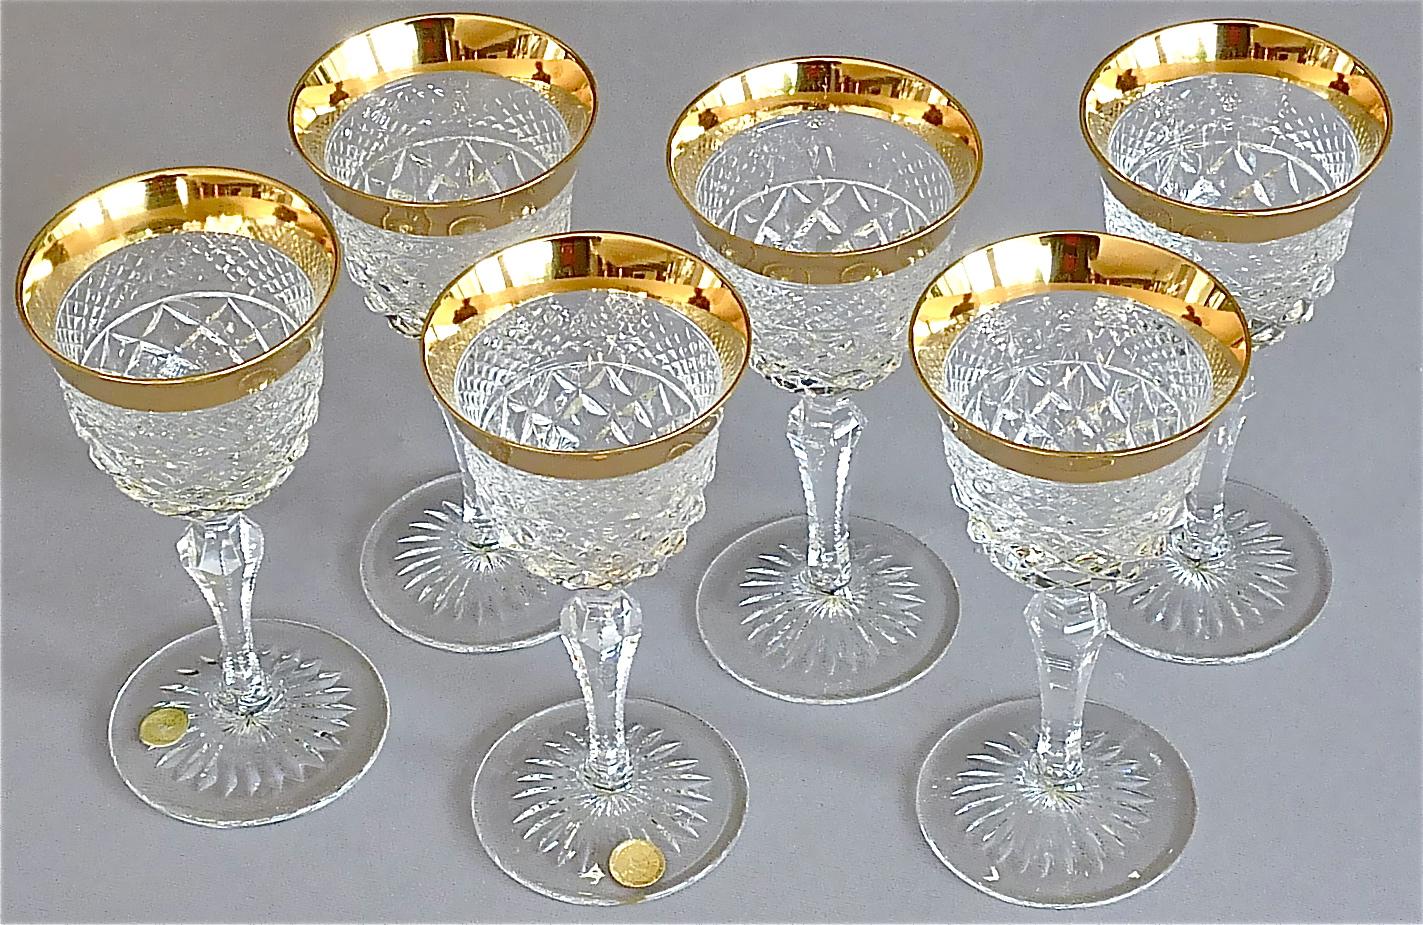 Precious 6 Wine Glasses Gold Crystal Faceted Stemware Josephinenhuette Moser For Sale 1